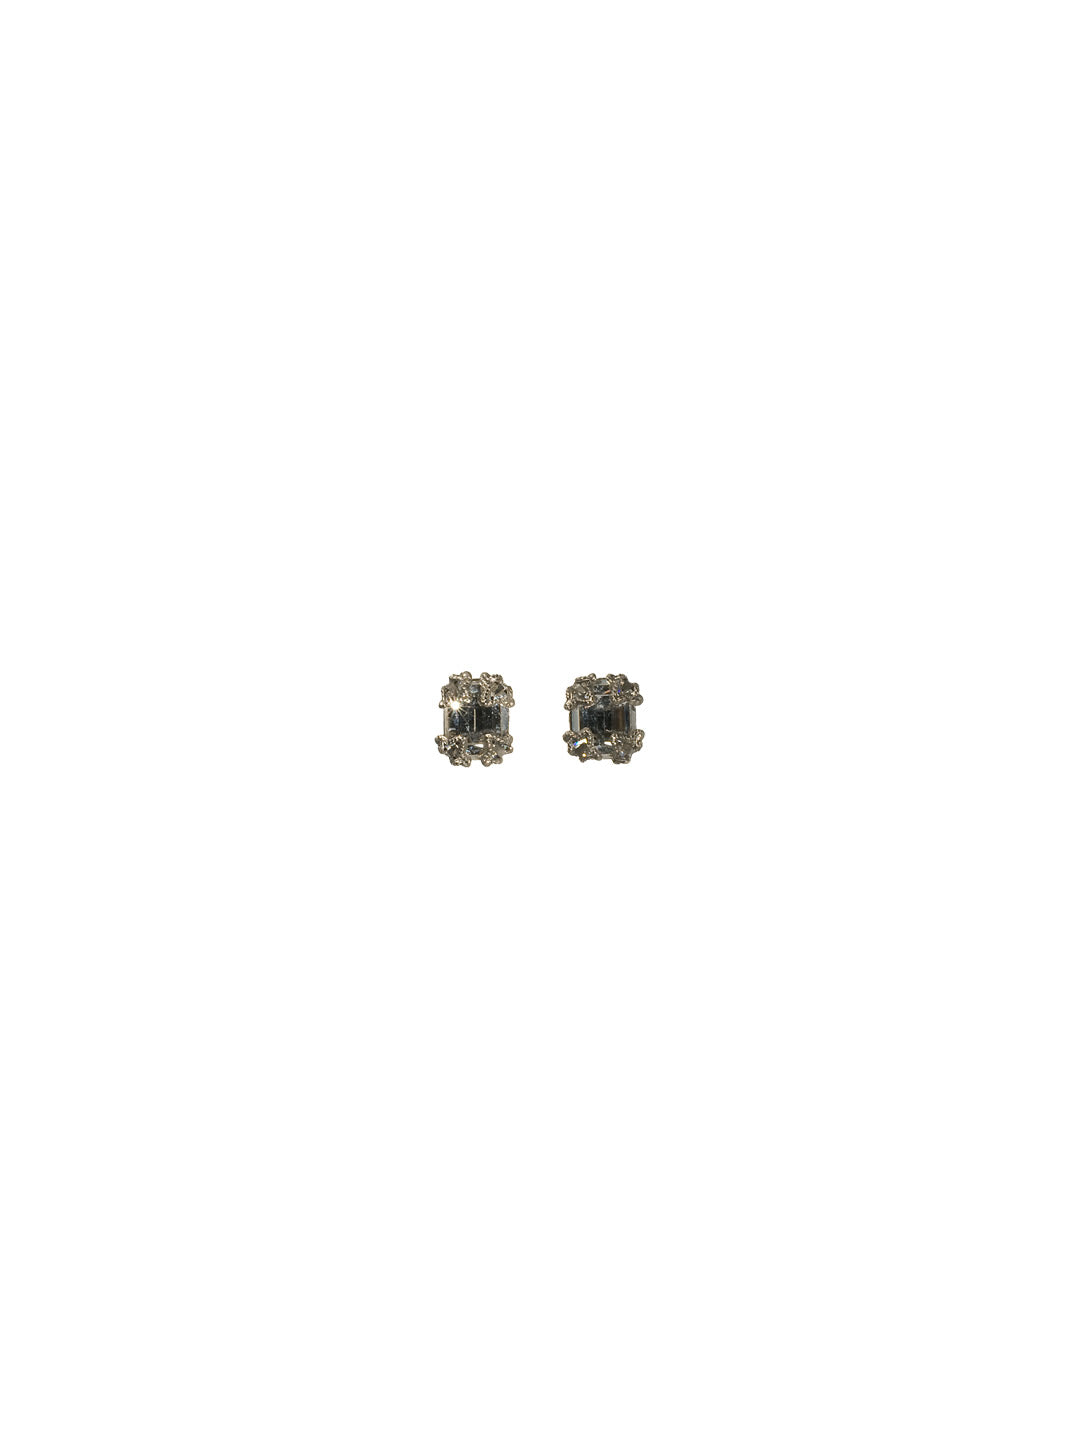 Antique-Inspired Emerald Cut Button Earring - ECF11ASSNB - <p>This cute-as-a-button style features a simple emerald cut crustal highlighted by a delicate, detailed setting. From Sorrelli's Snow Bunny collection in our Antique Silver-tone finish.</p>